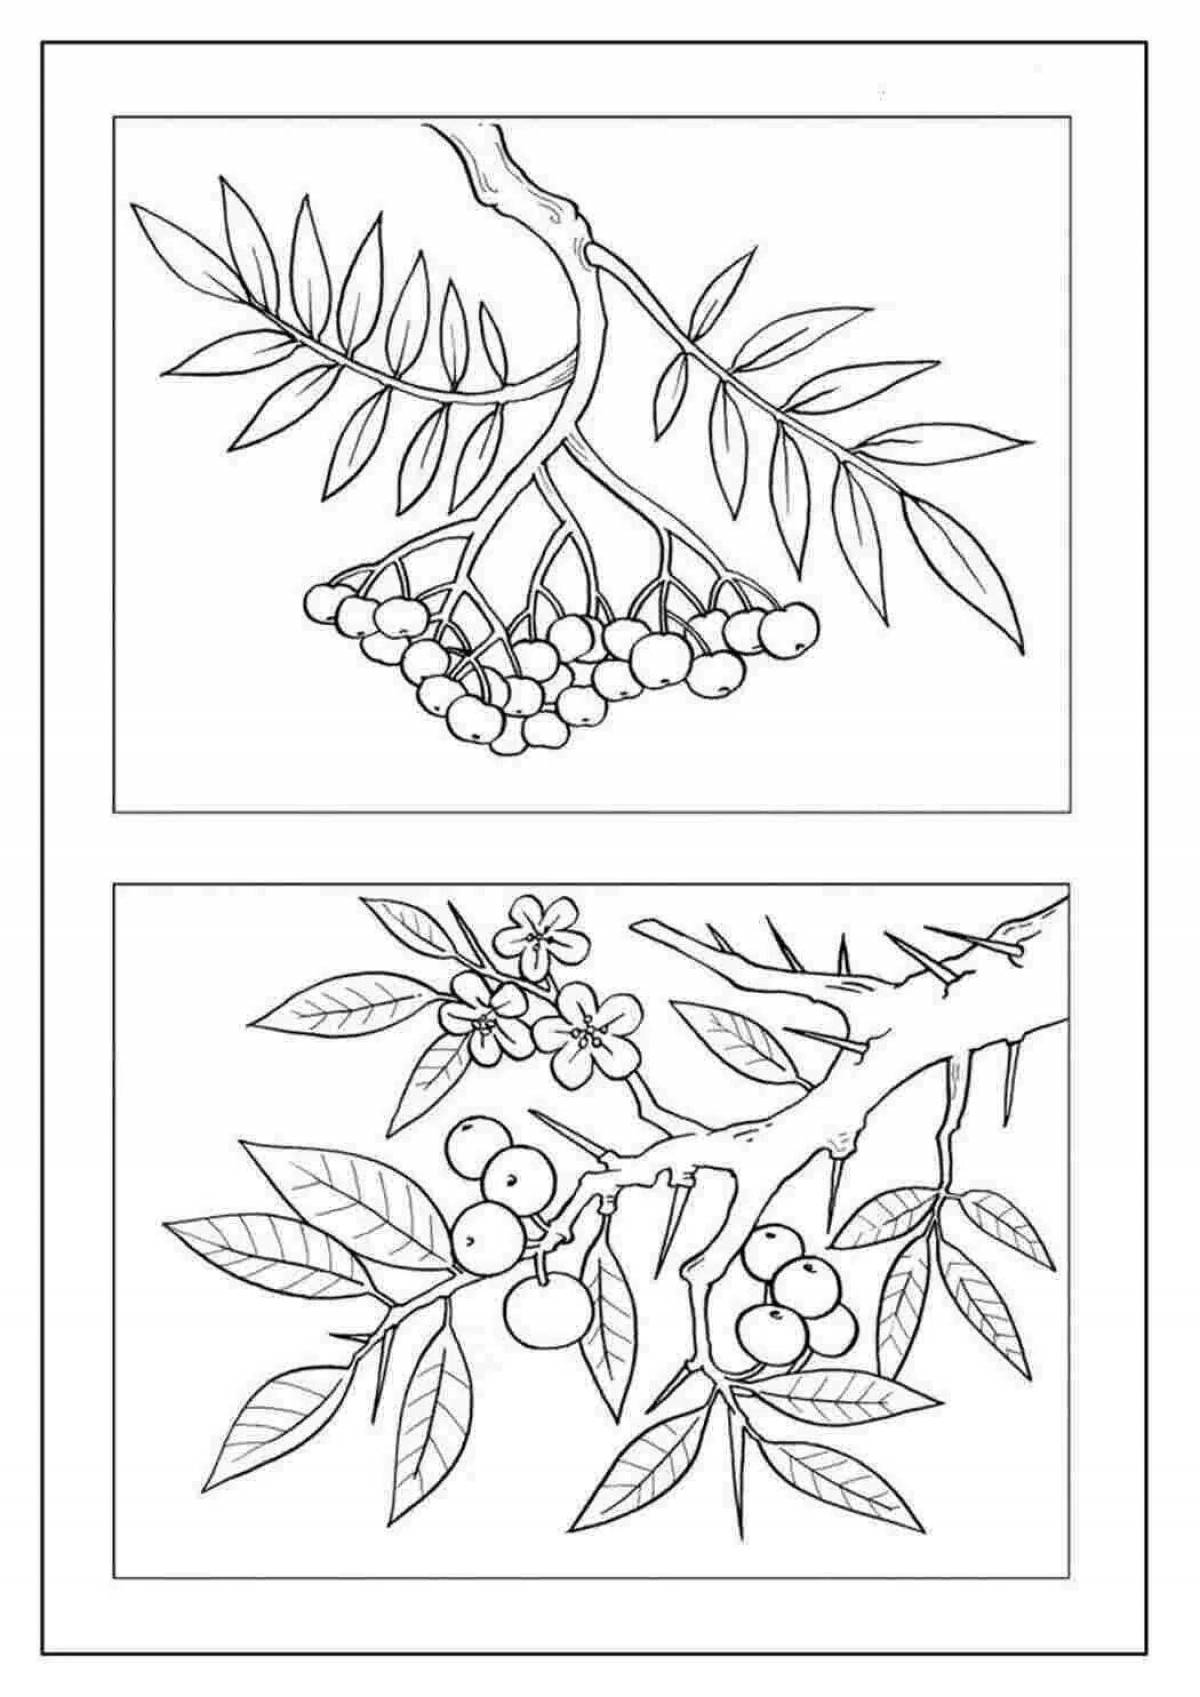 Coloring page rowan twig coloring page for kids